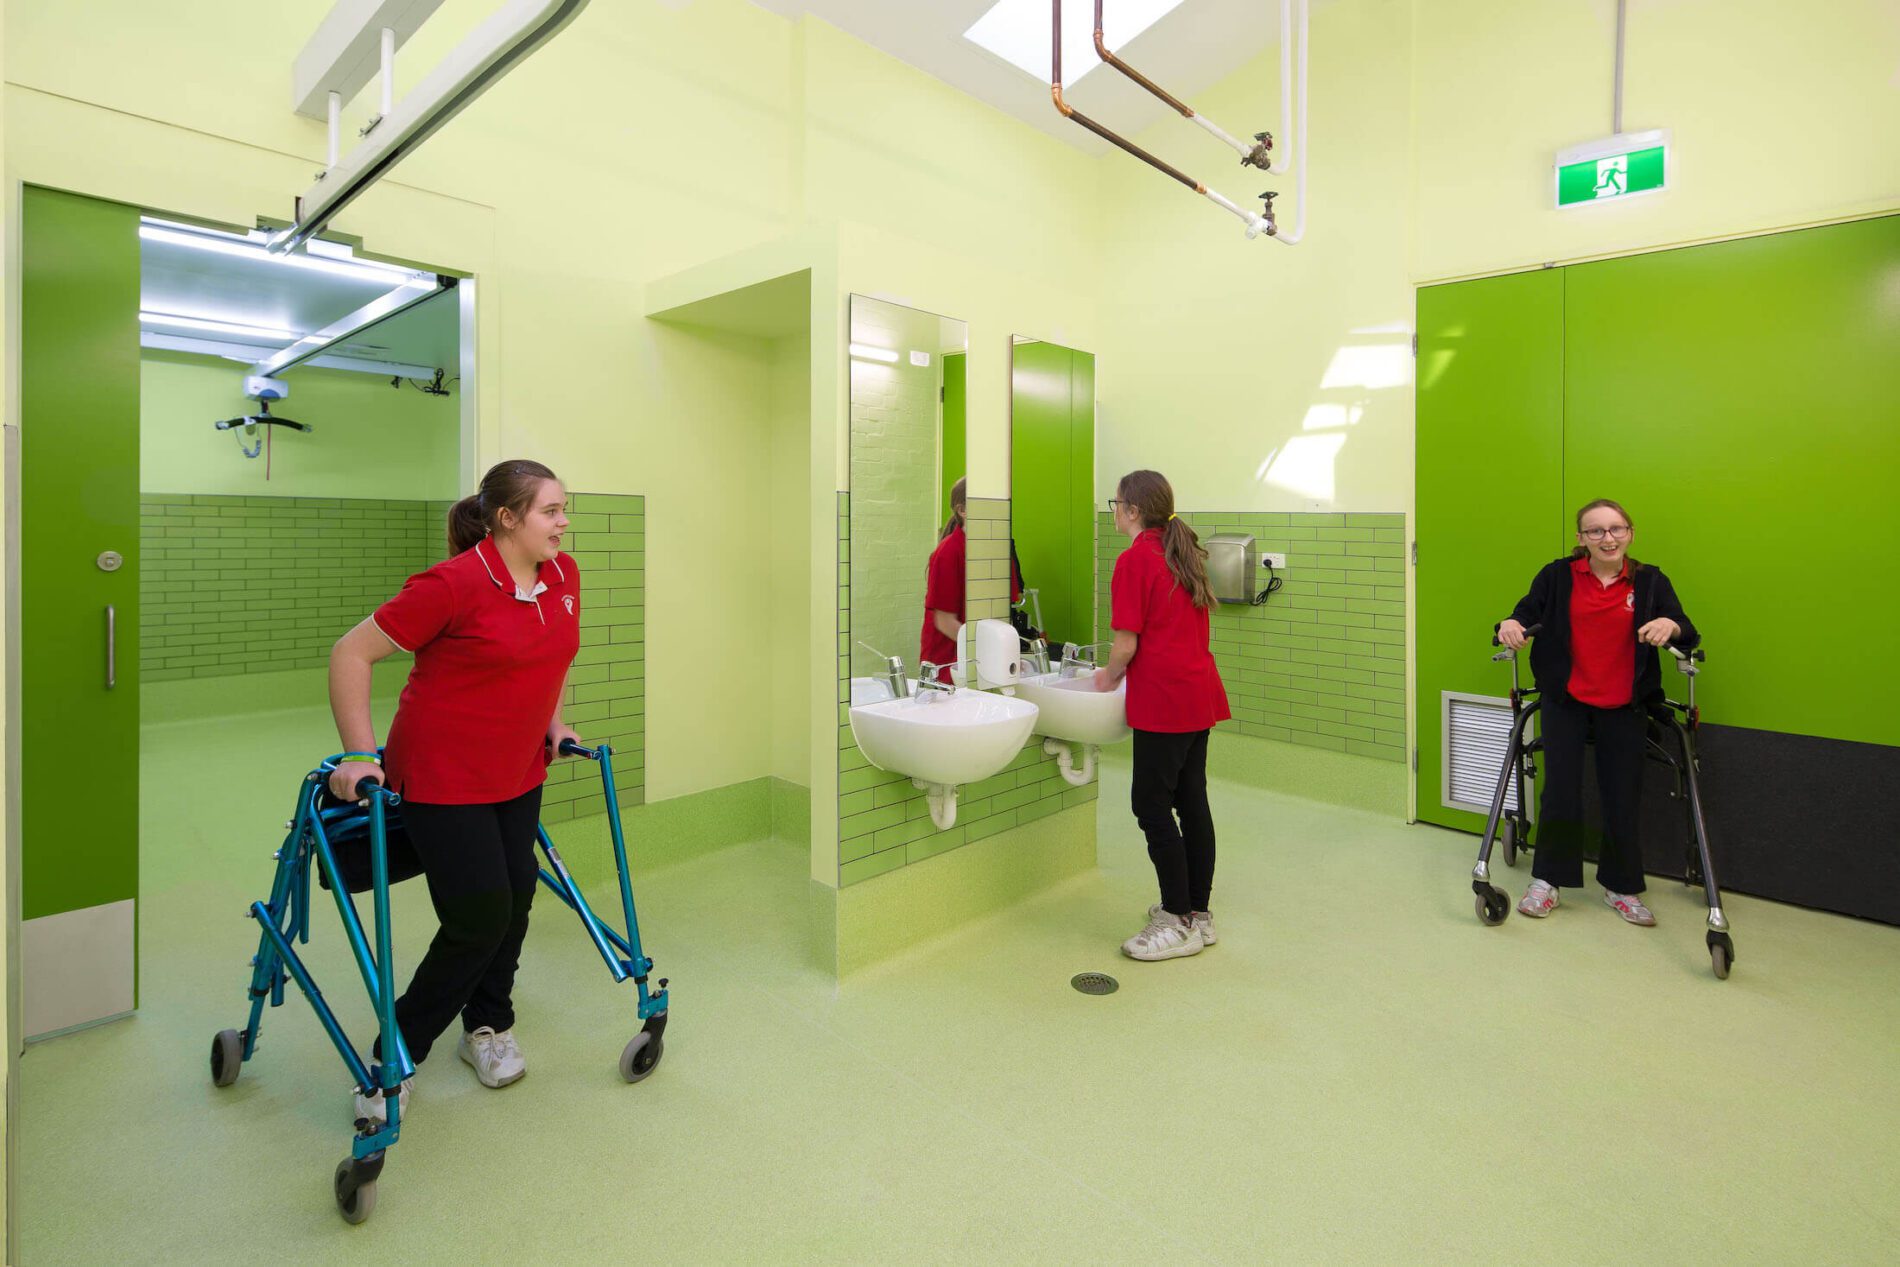 Three female students - two using walkers - use green toilet block and change rooms